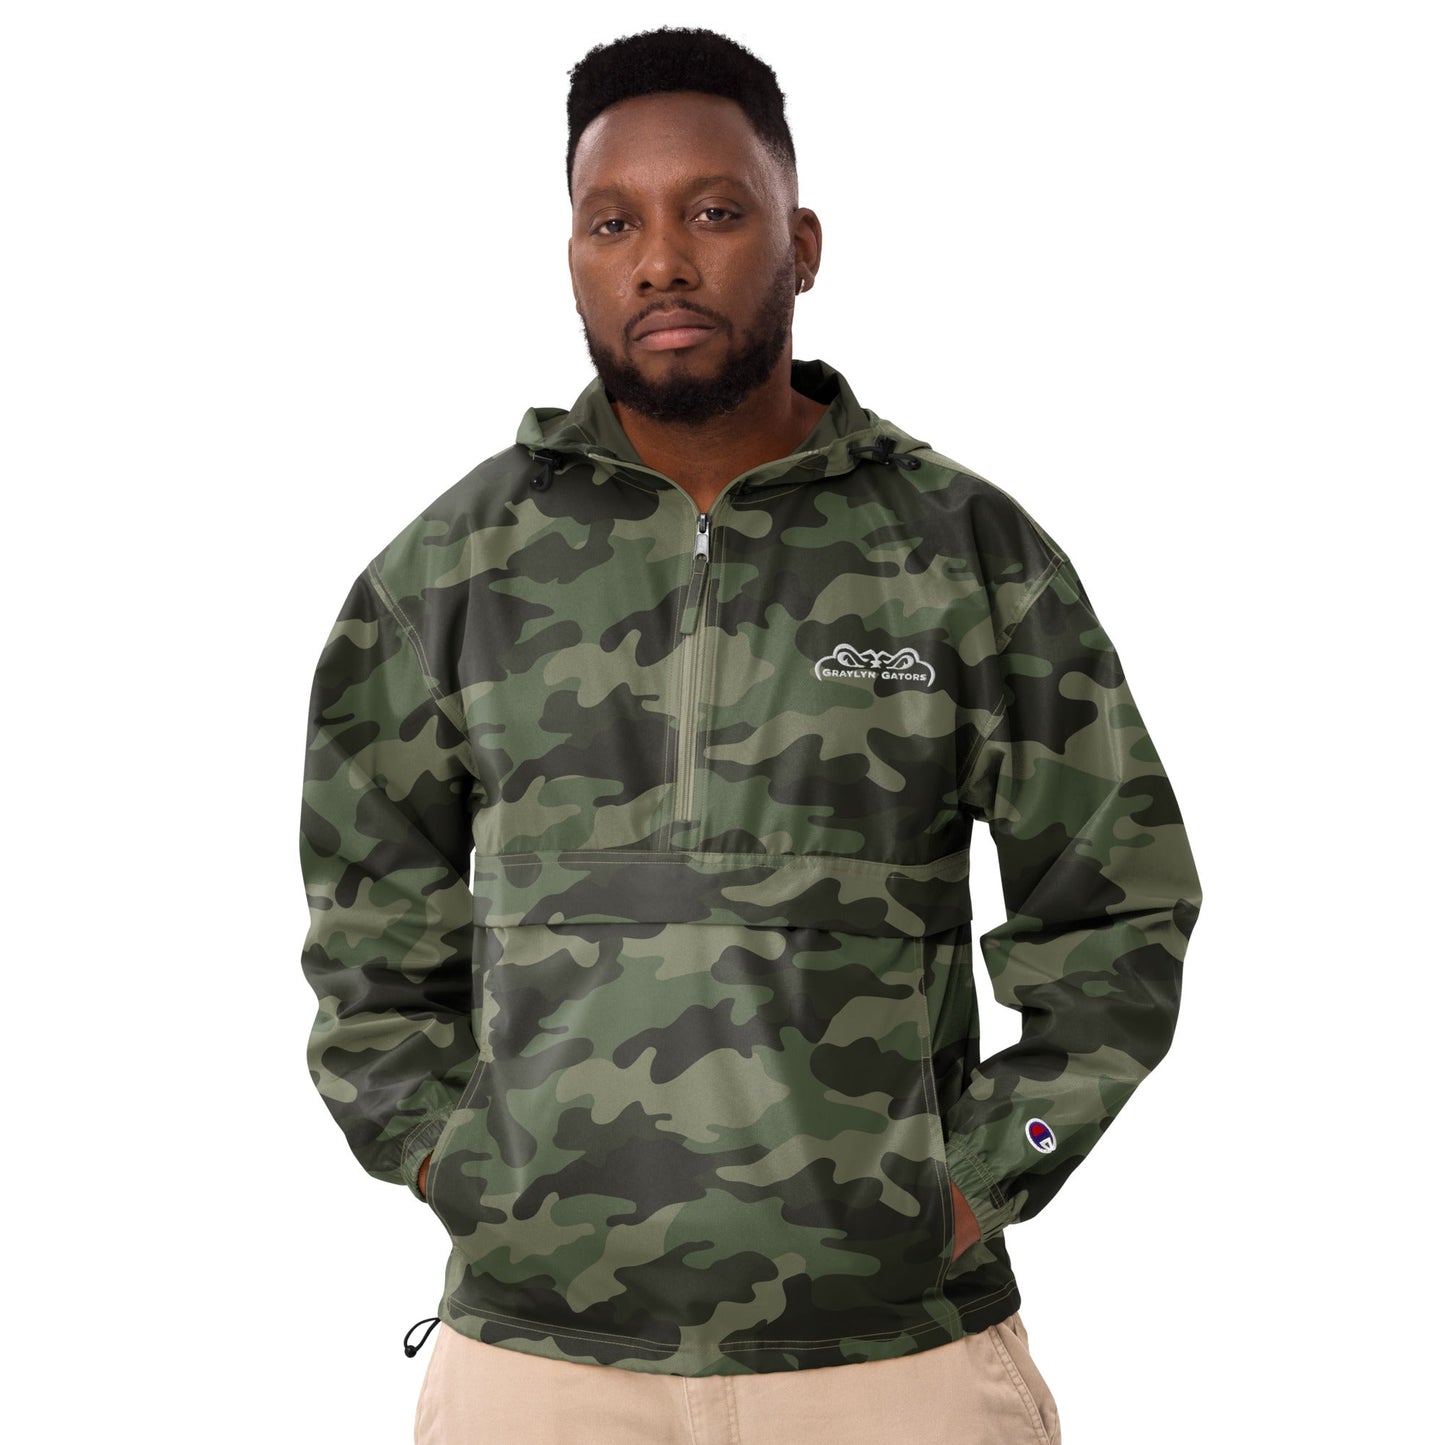 Gator's Embroidered Champion Packable Jacket